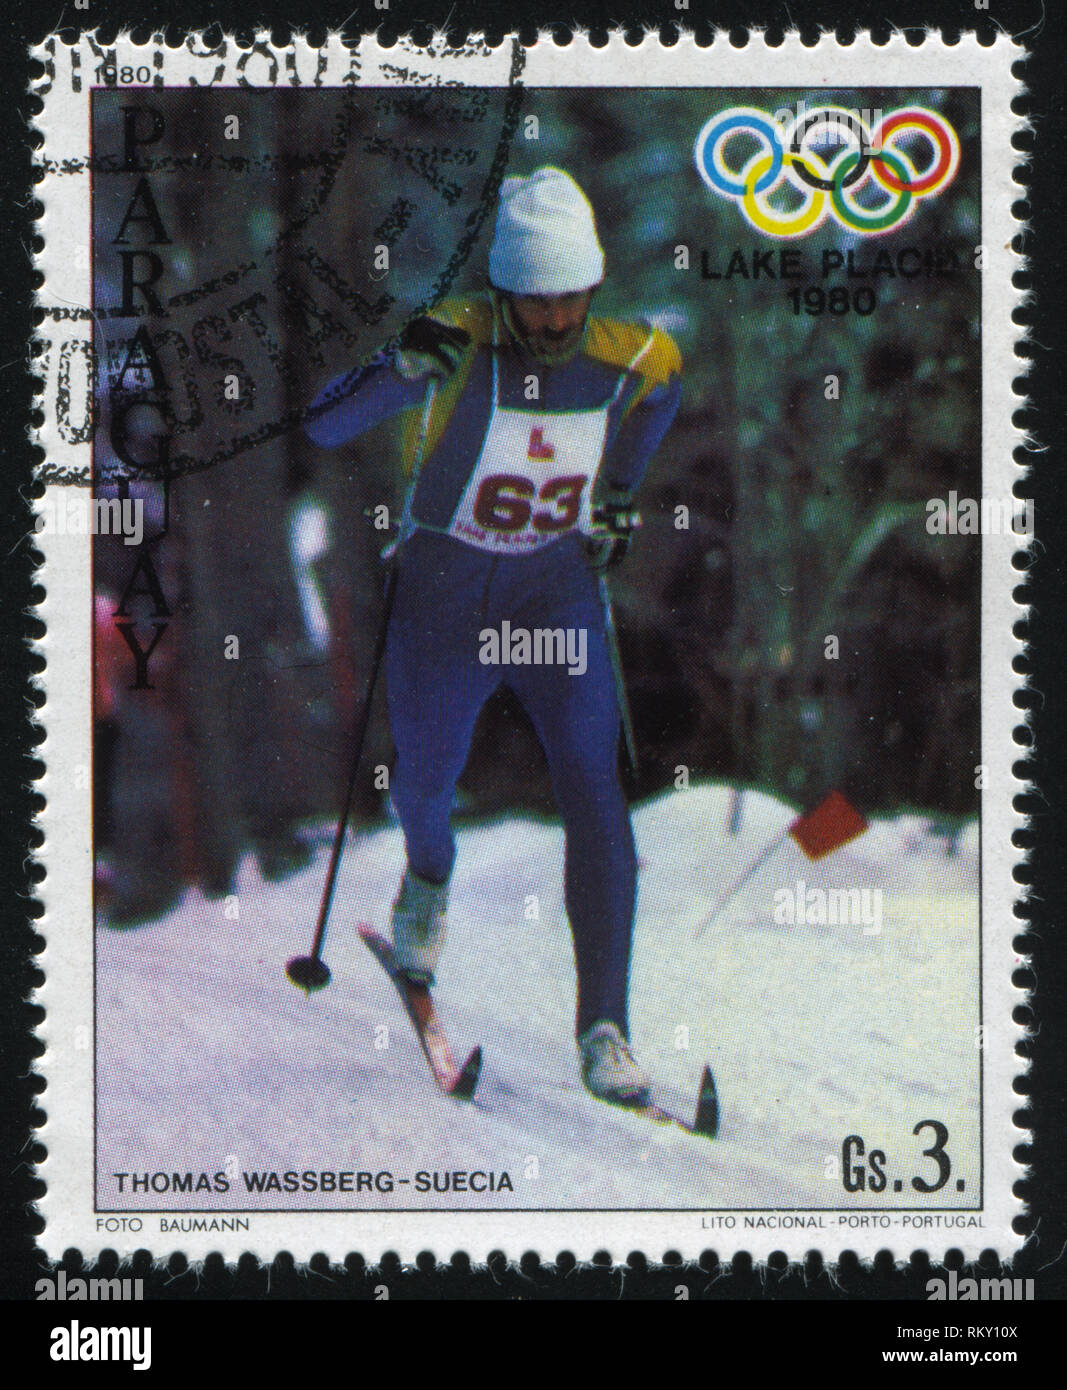 RUSSIA KALININGRAD, 19 APRIL 2017: stamp printed by Paraguay, shows  Thomas Wassberg, Cross country skier at Winter Olympics in Lake Placid, circa 198 Stock Photo